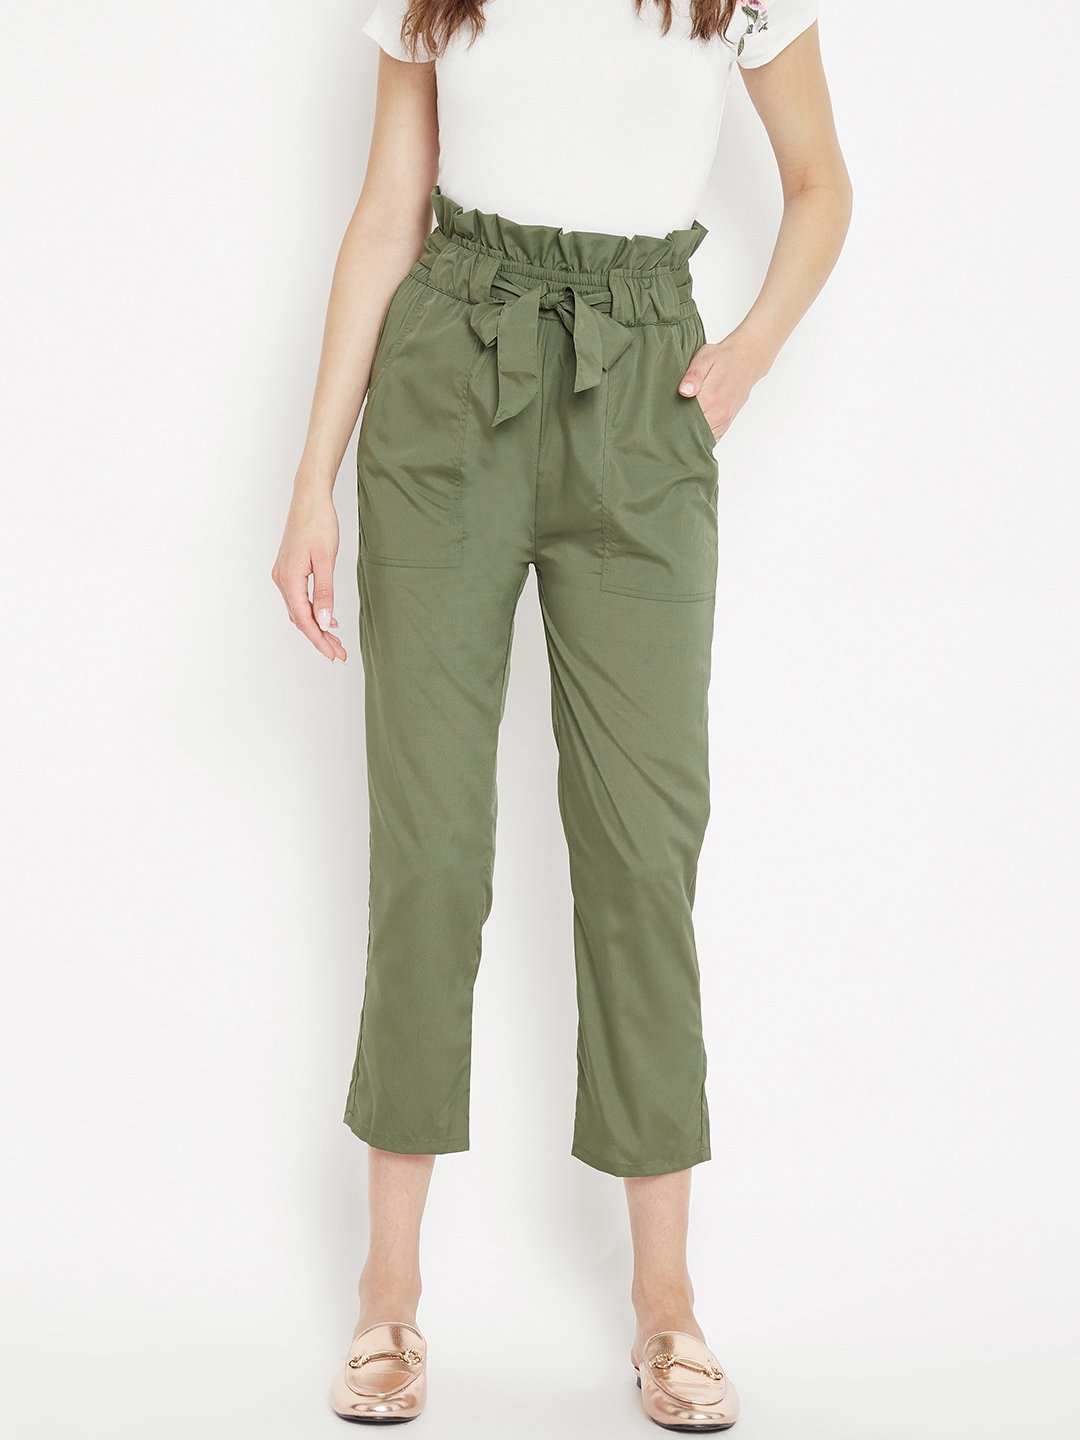 How to Style Olive Green Pants 13 Refreshing Outfit Ideas for Women   FMagcom